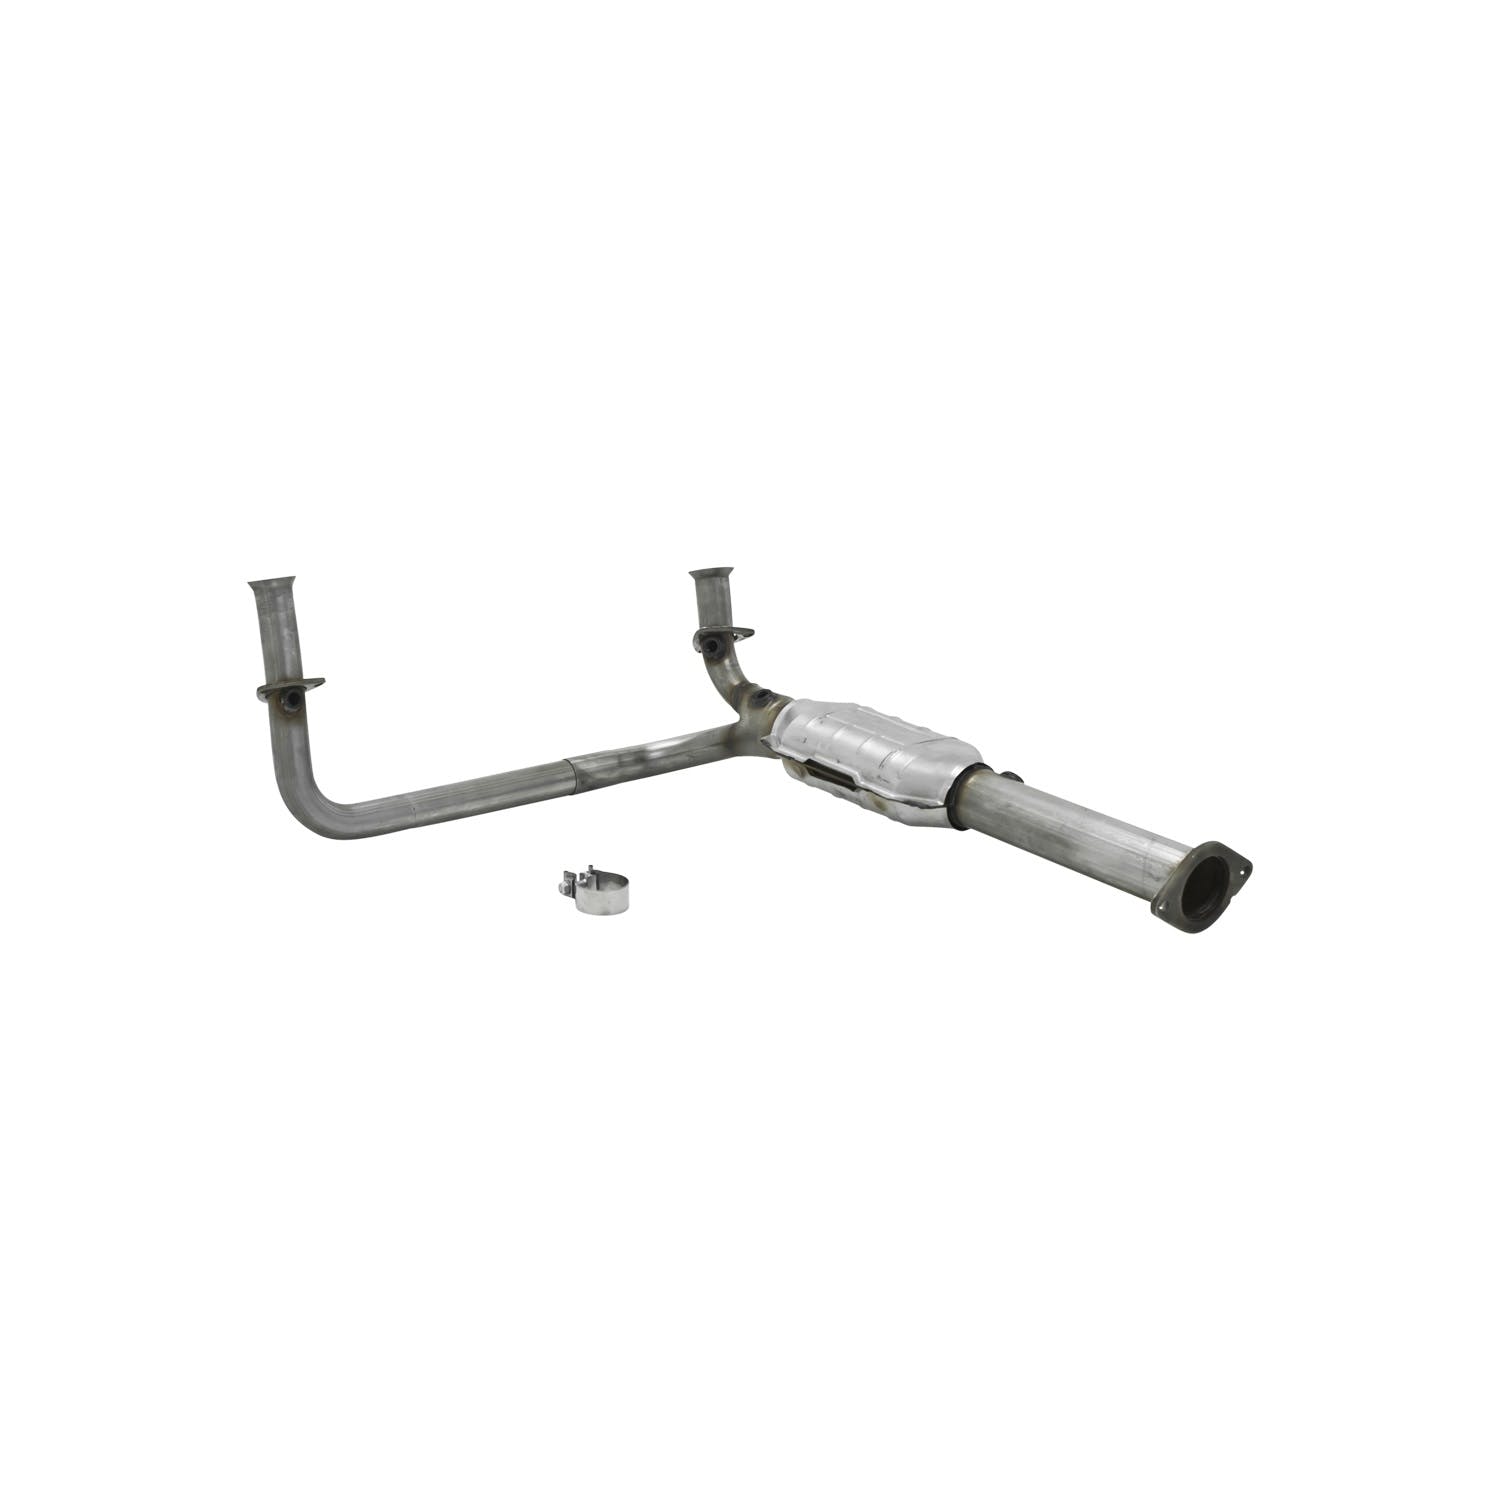 Flowmaster Catalytic Converters 2010022 Catalytic Converter-Direct Fit-49 State-3.00 in Inlet/Outlet